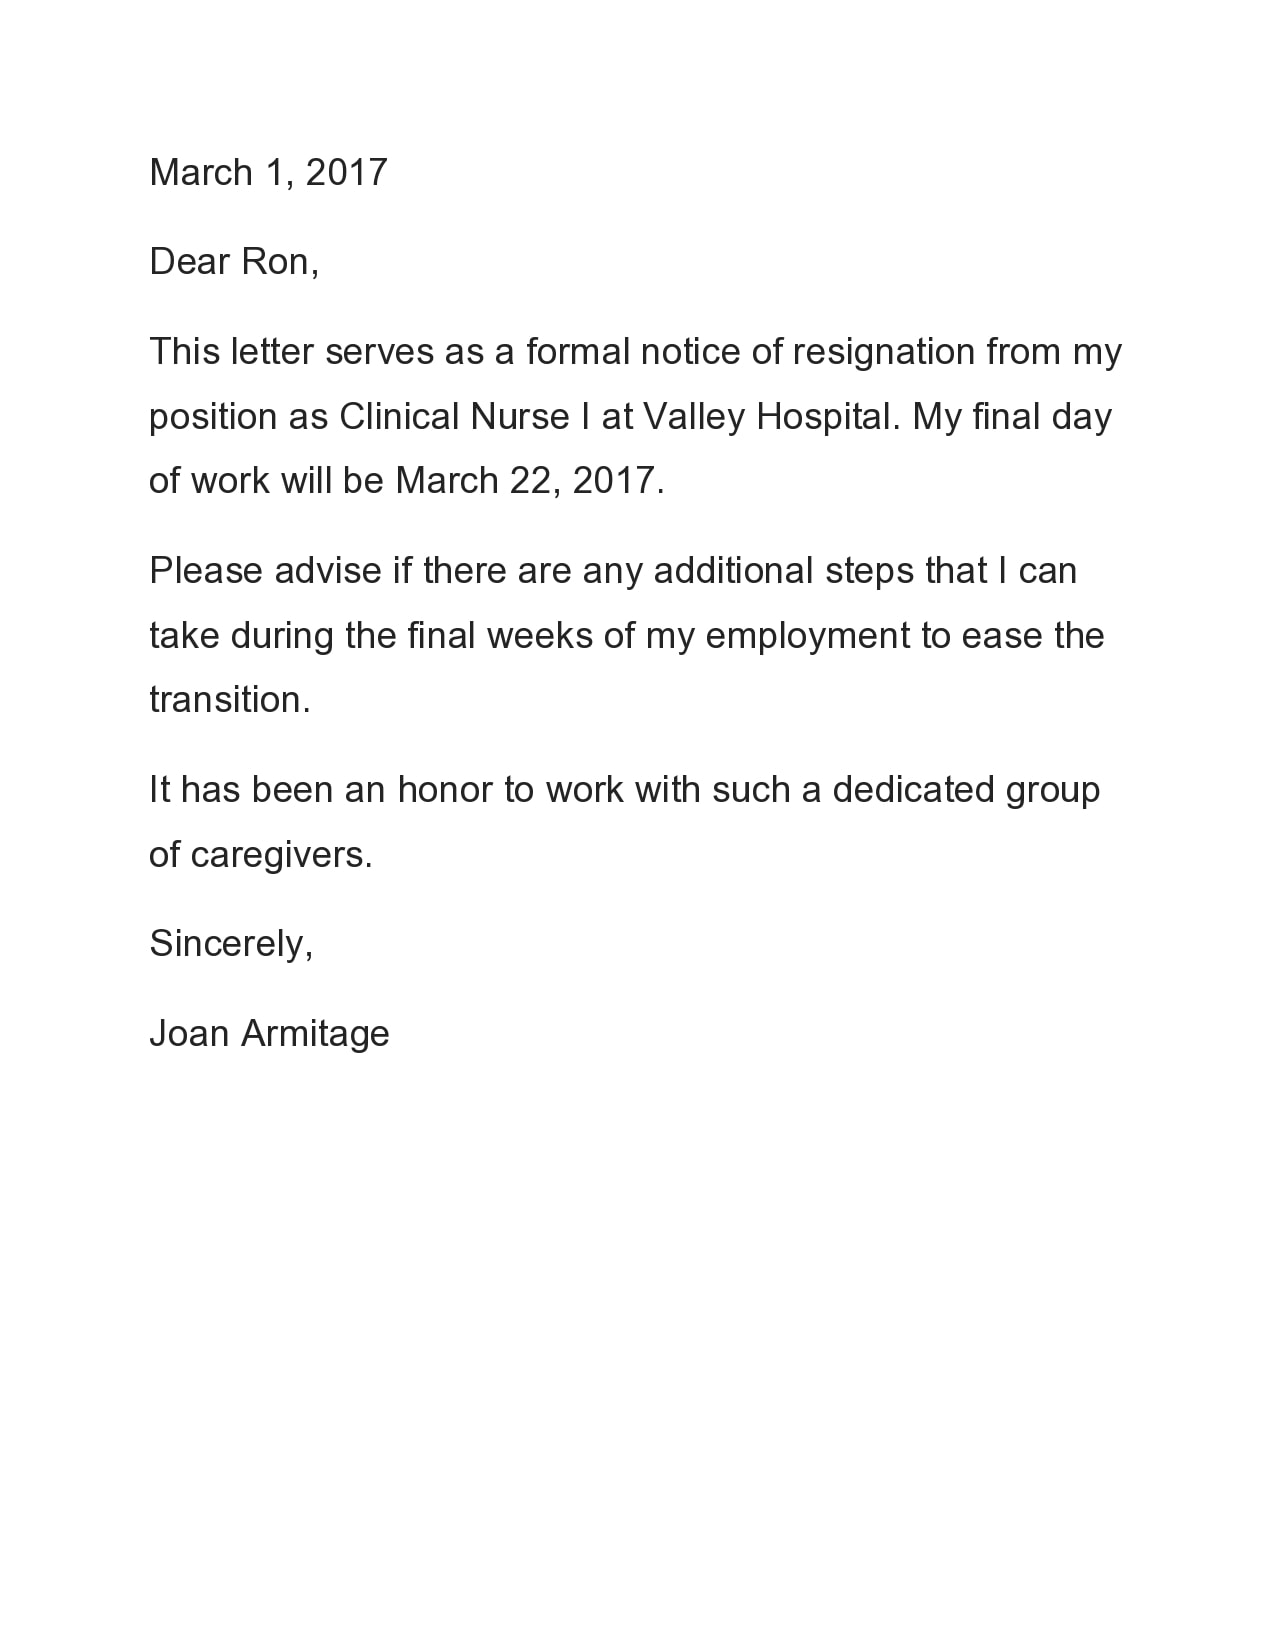 stunning-info-about-resignation-letter-format-hospital-warehouse-resume